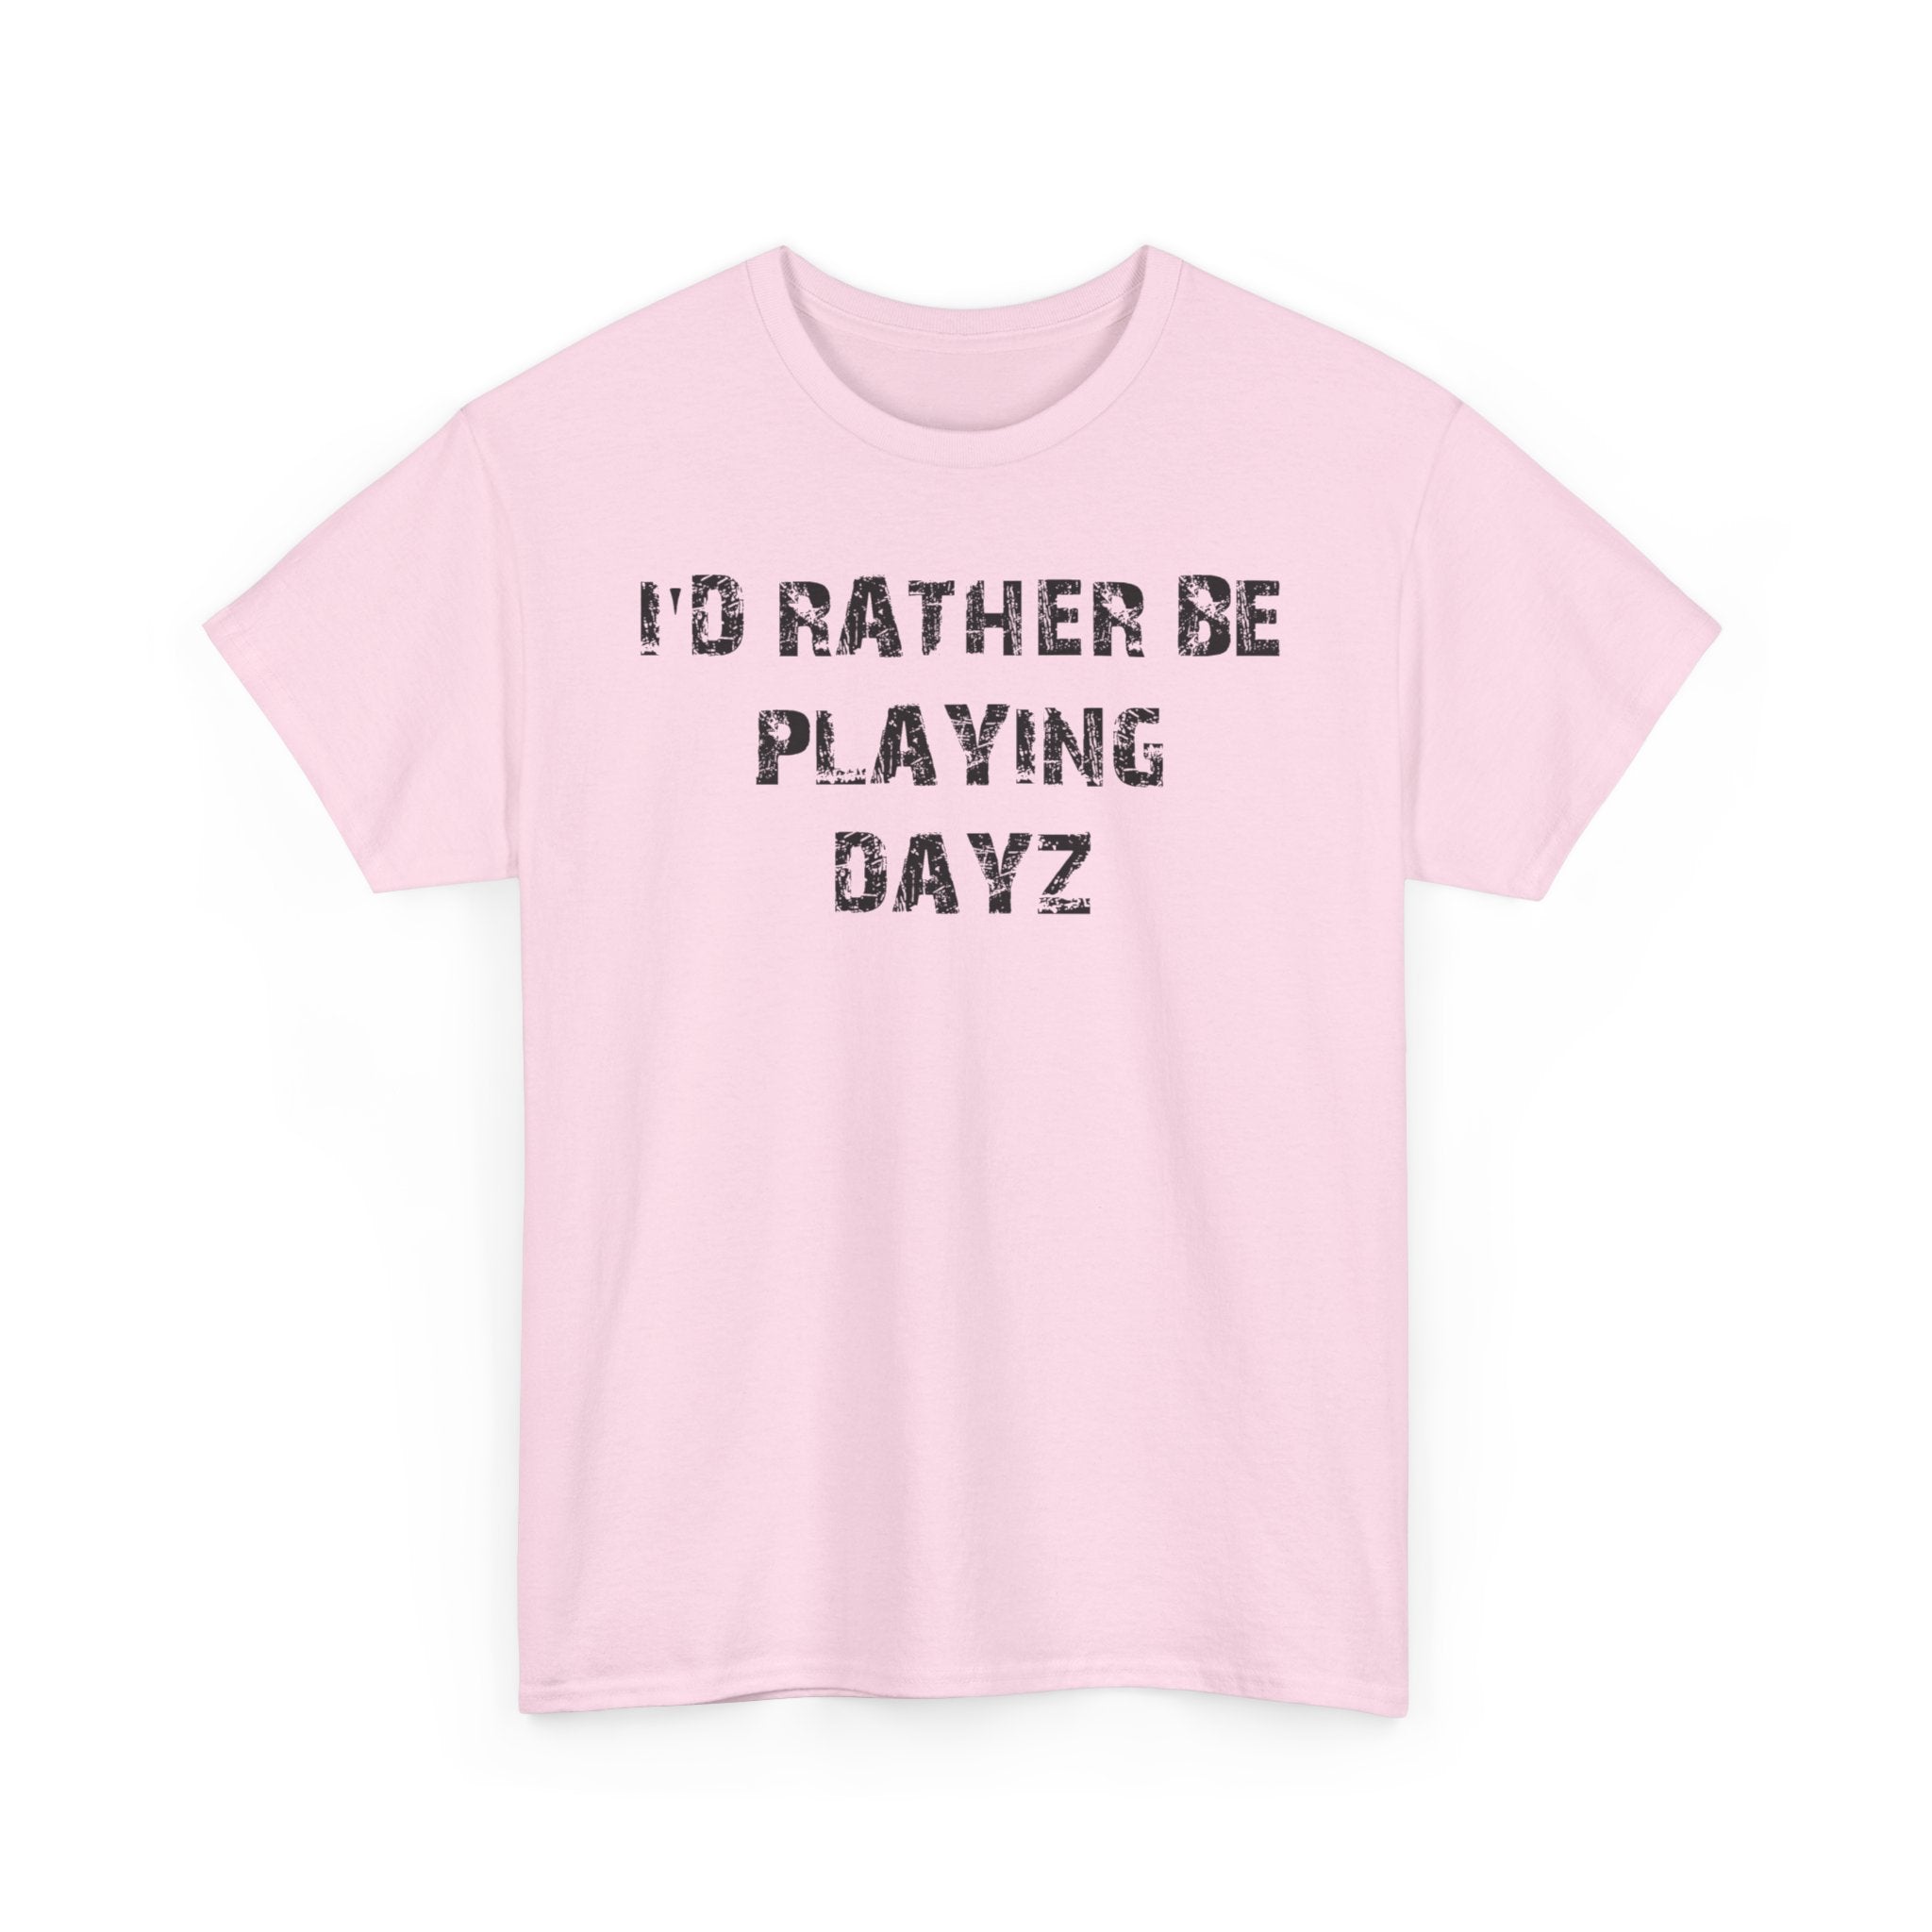 Dayz I'd Rather Be Playing Unisex Heavy Cotton Tee cups mugs cup Gamer Gift For Him Her Game Cup Cups Mugs Birthday Christmas Valentine's Anniversary Gifts